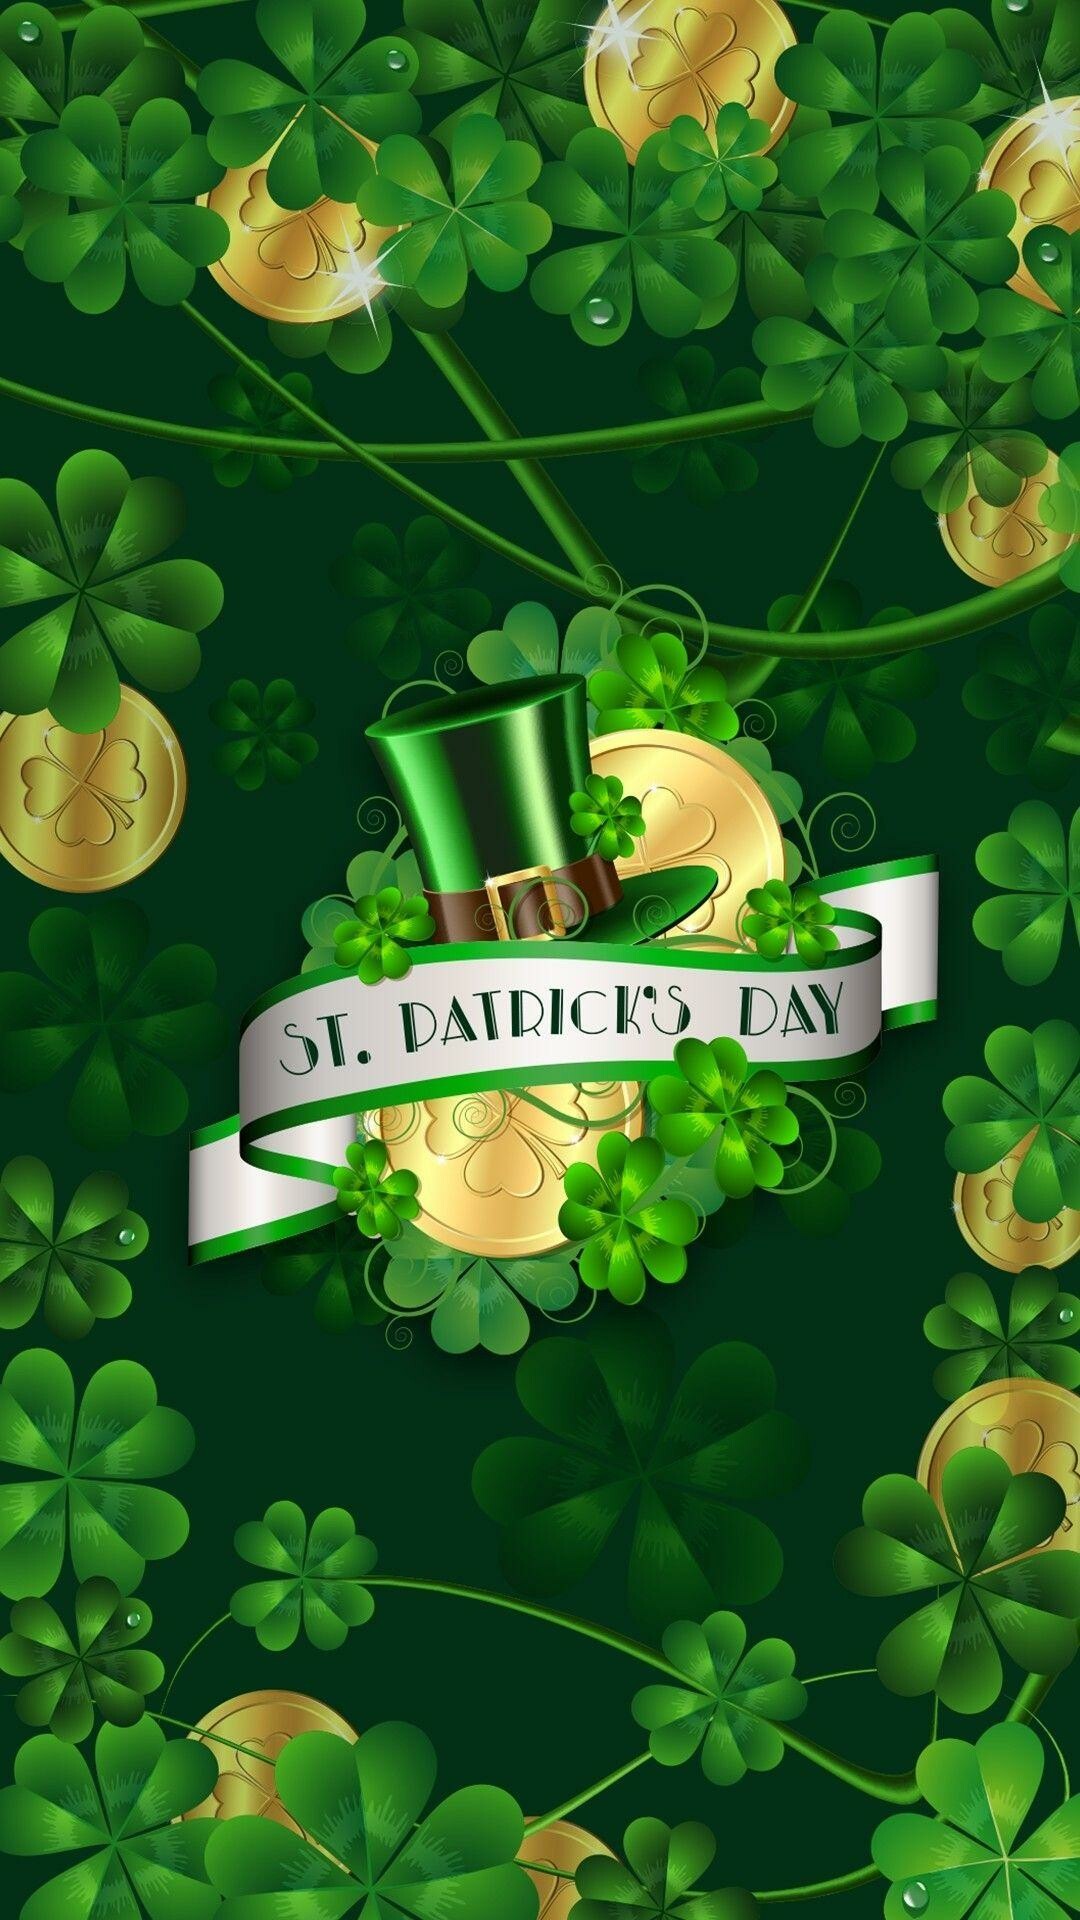 Saint Patrick's Day: Clovers, An annual feast day, Ireland. 1080x1920 Full HD Background.